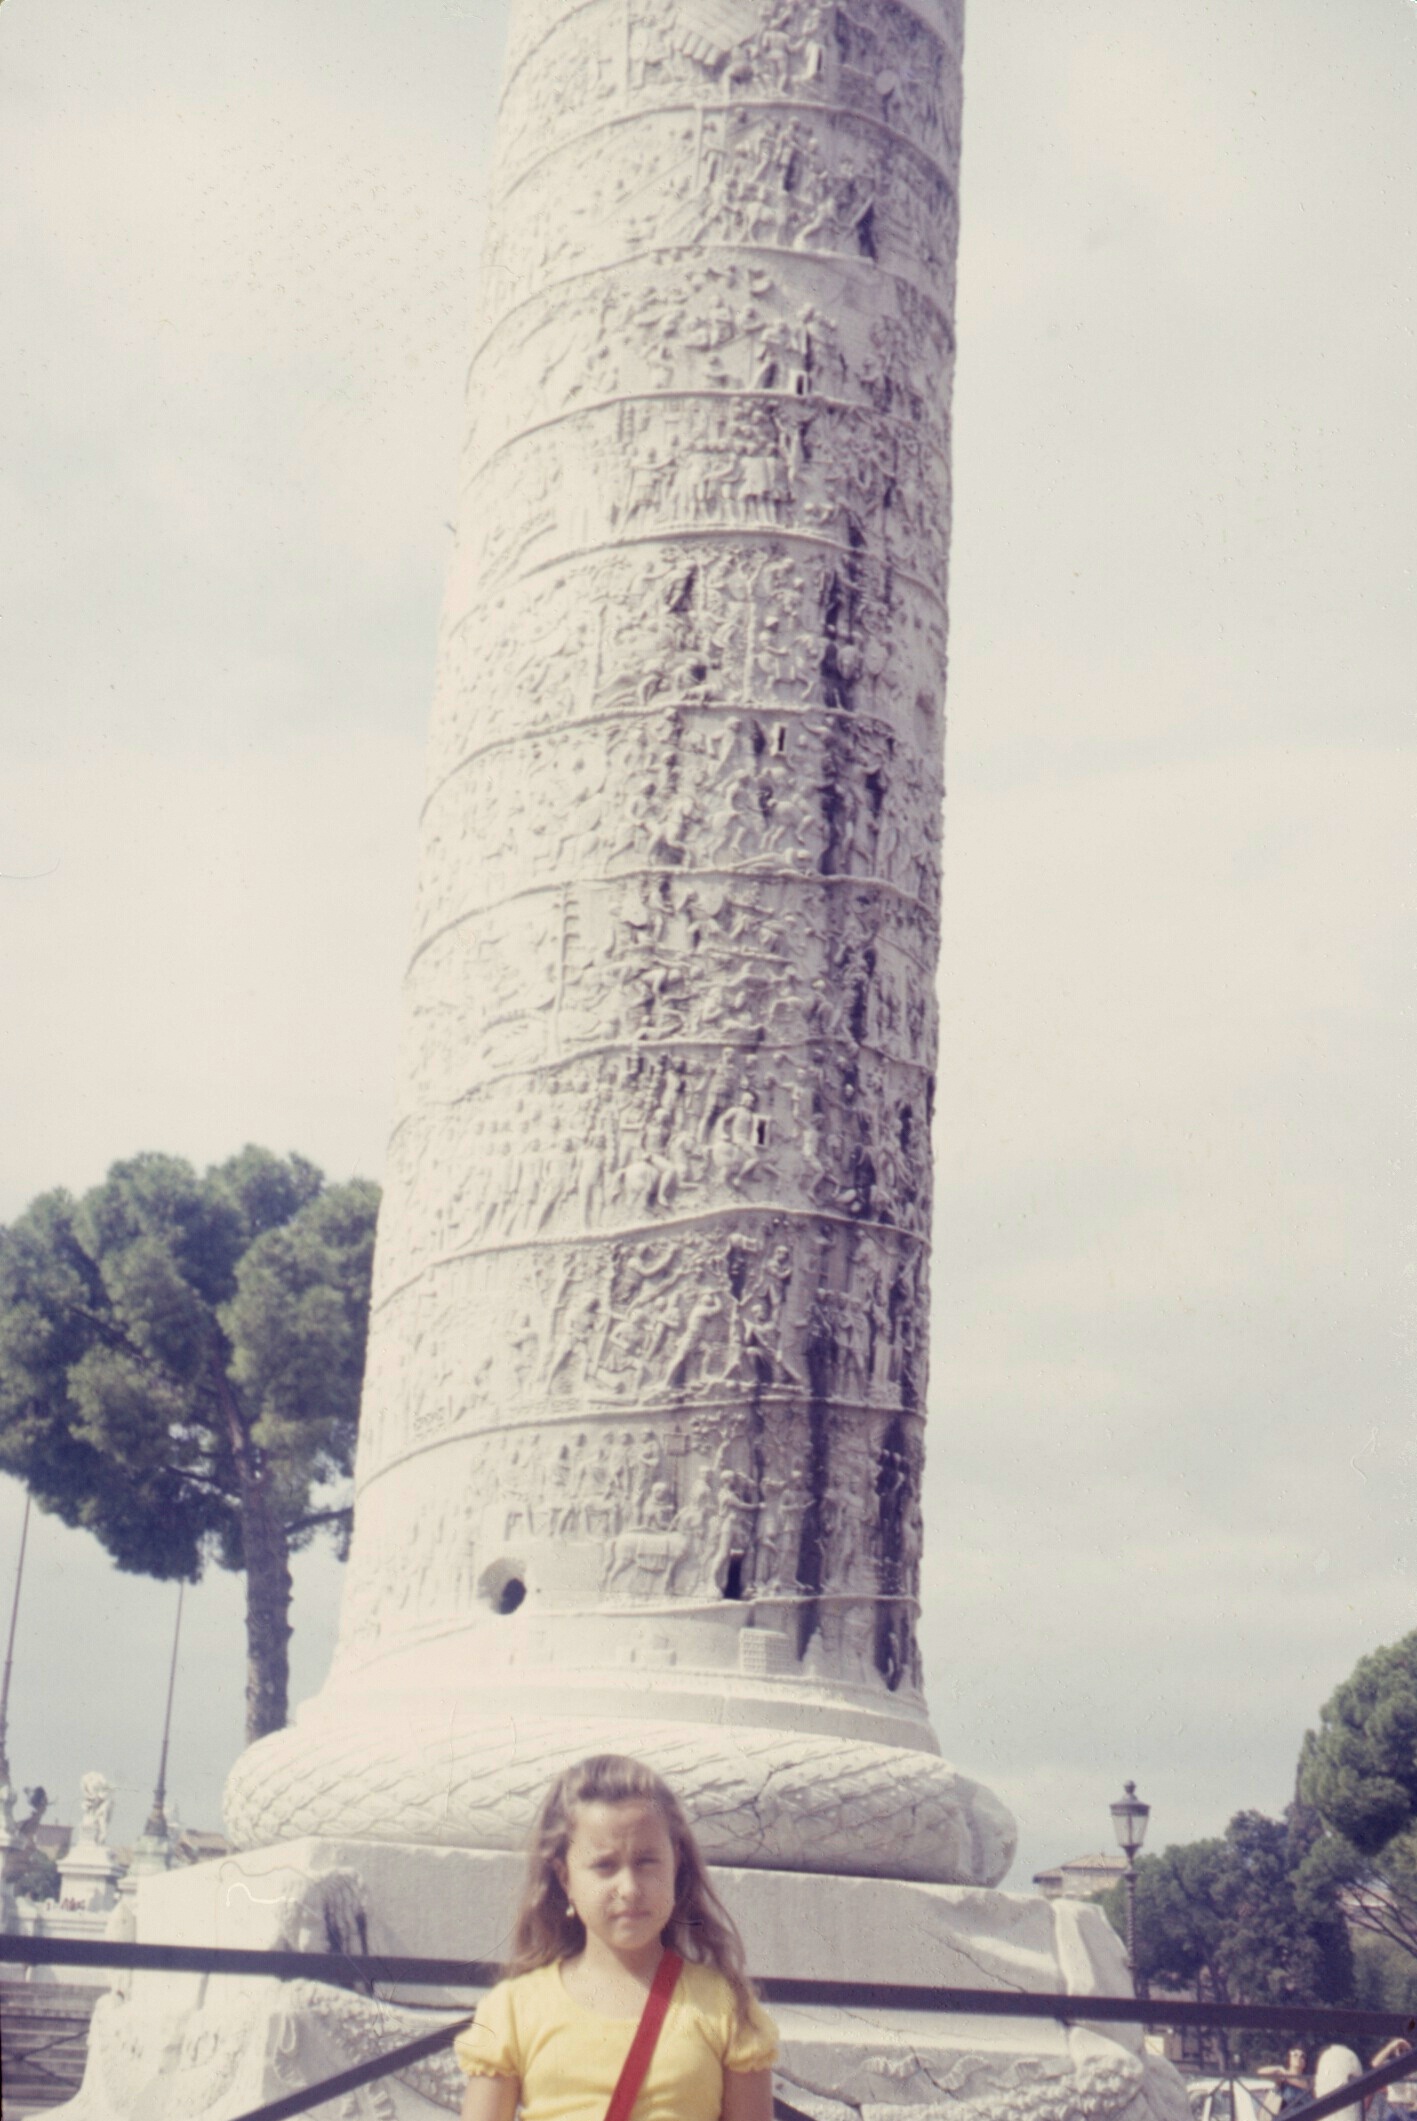 A traveler was born - Annabella's first trip to Europe in 1975. Trajan's Column in Rome, already fending off pickpockets by wearing my purse criss-cross.